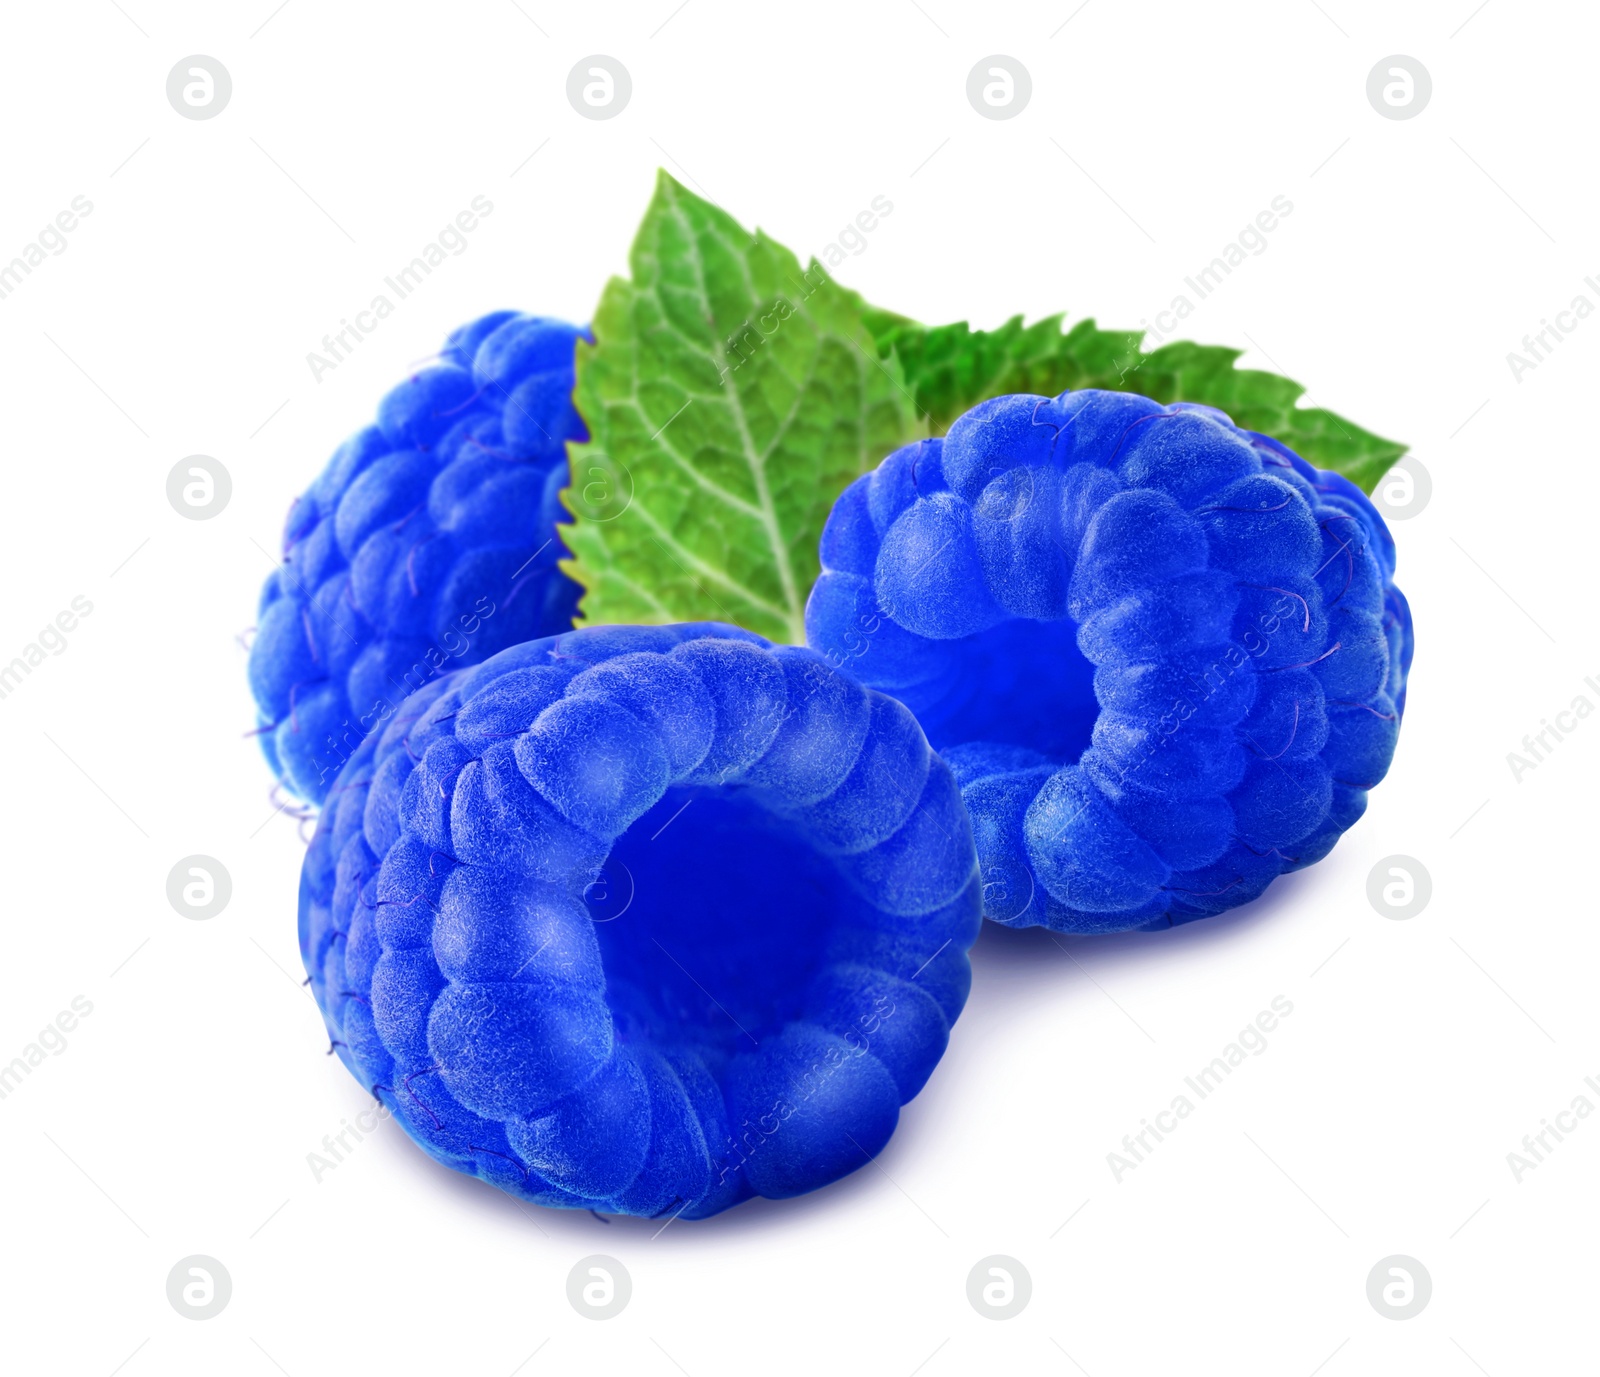 Image of Fresh blue raspberries with green leaves on white background